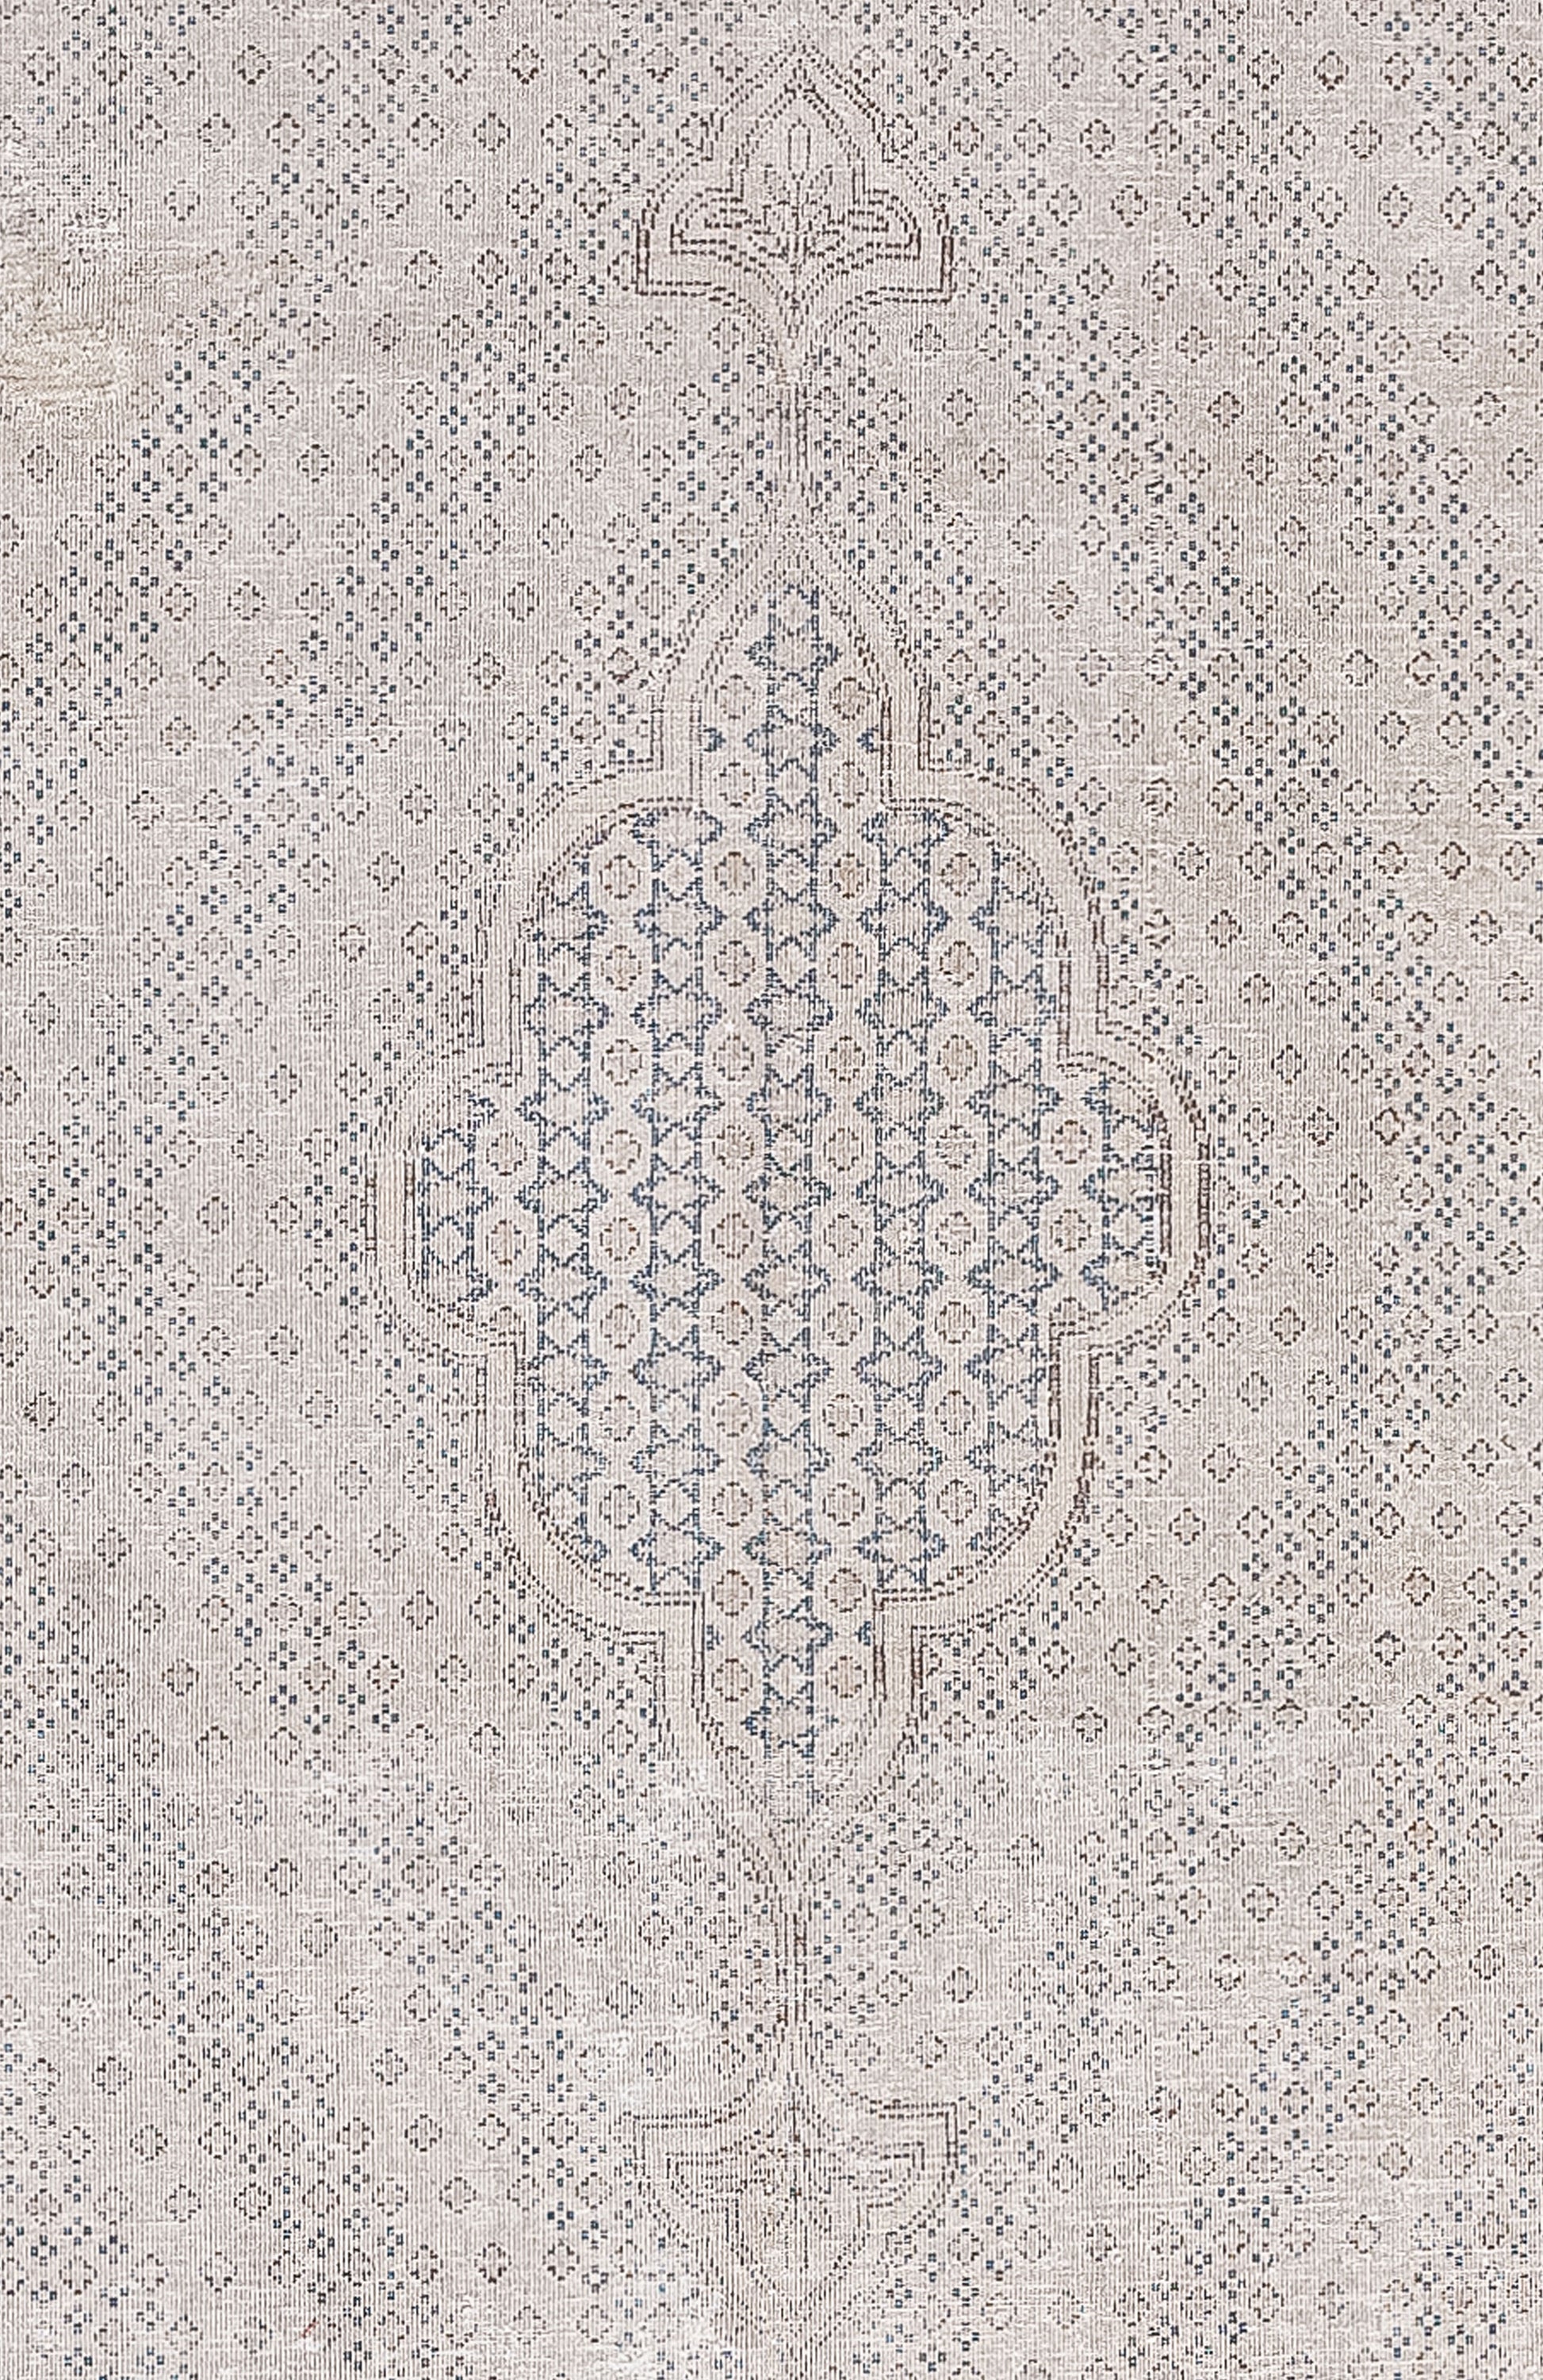 A standout embellishment in front of a diamond-shaped pattern sits in the center of the rug, it also comes with two fused fleur-de-lis at the top and bottom.